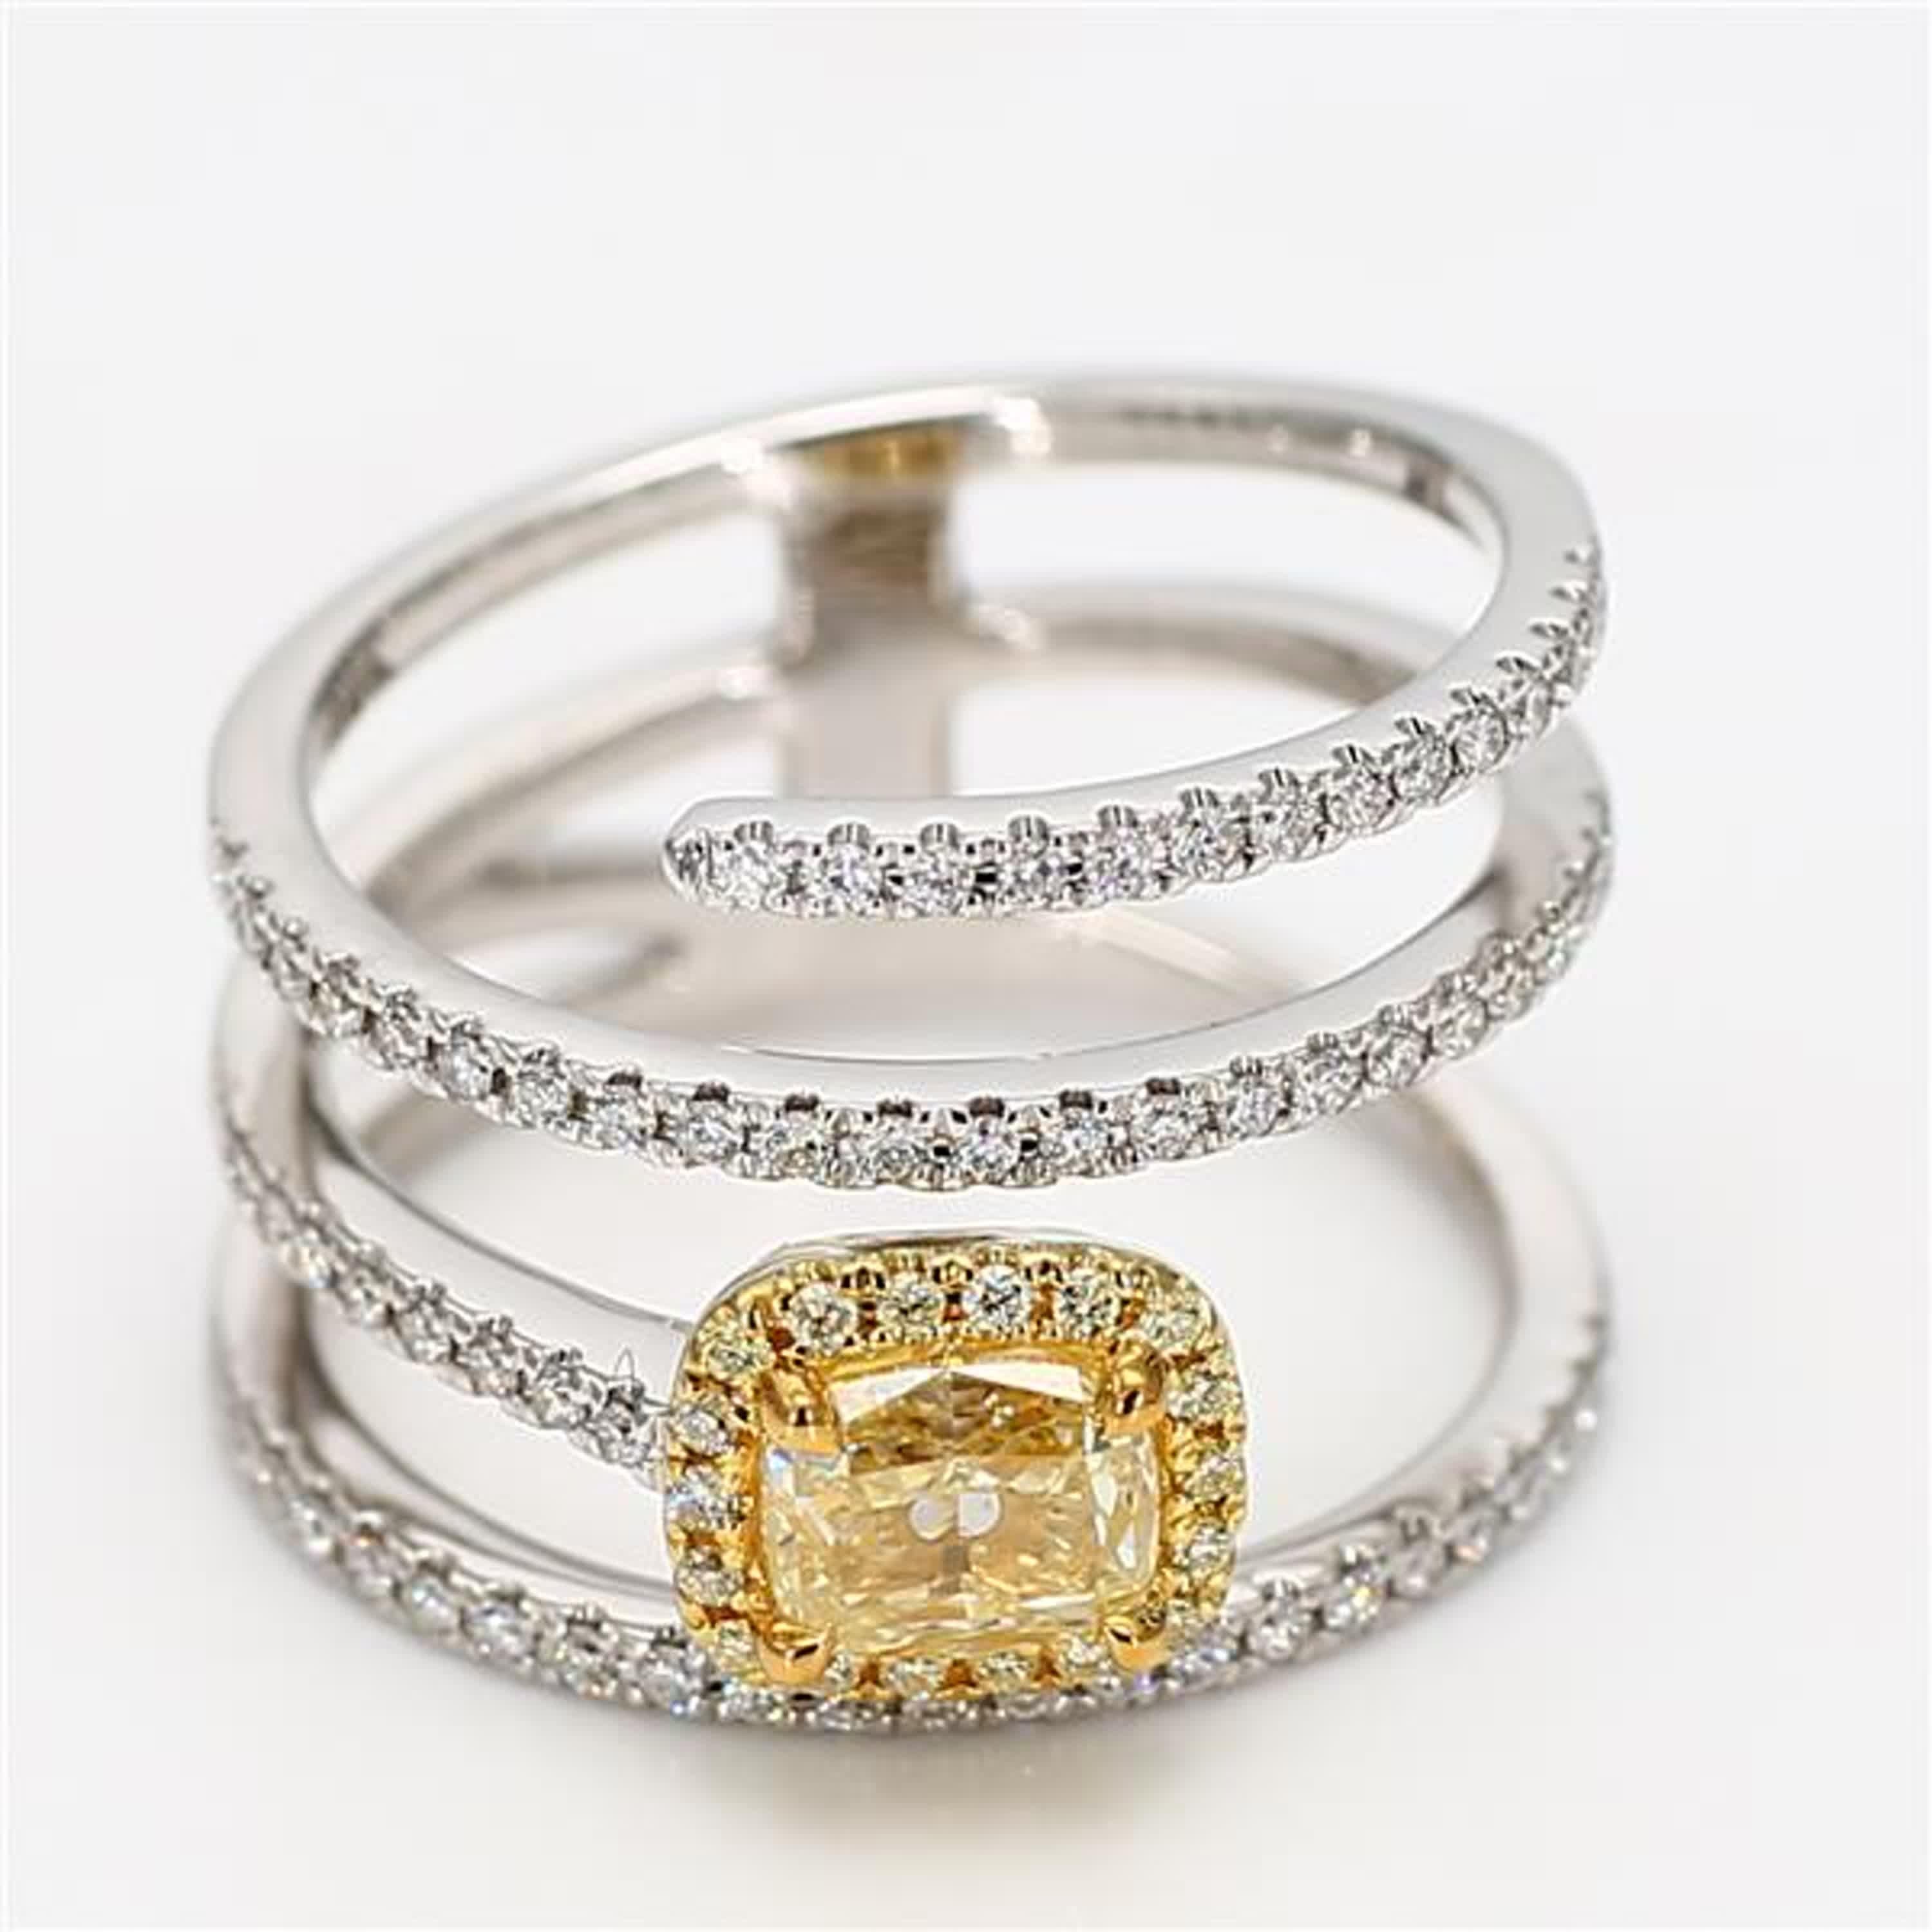 RareGemWorld's classic GIA certified diamond ring. Mounted in a beautiful 18K Yellow and White Gold setting with a natural cushion cut yellow diamond. The yellow diamond is surrounded by round natural white diamond melee and natural round yellow